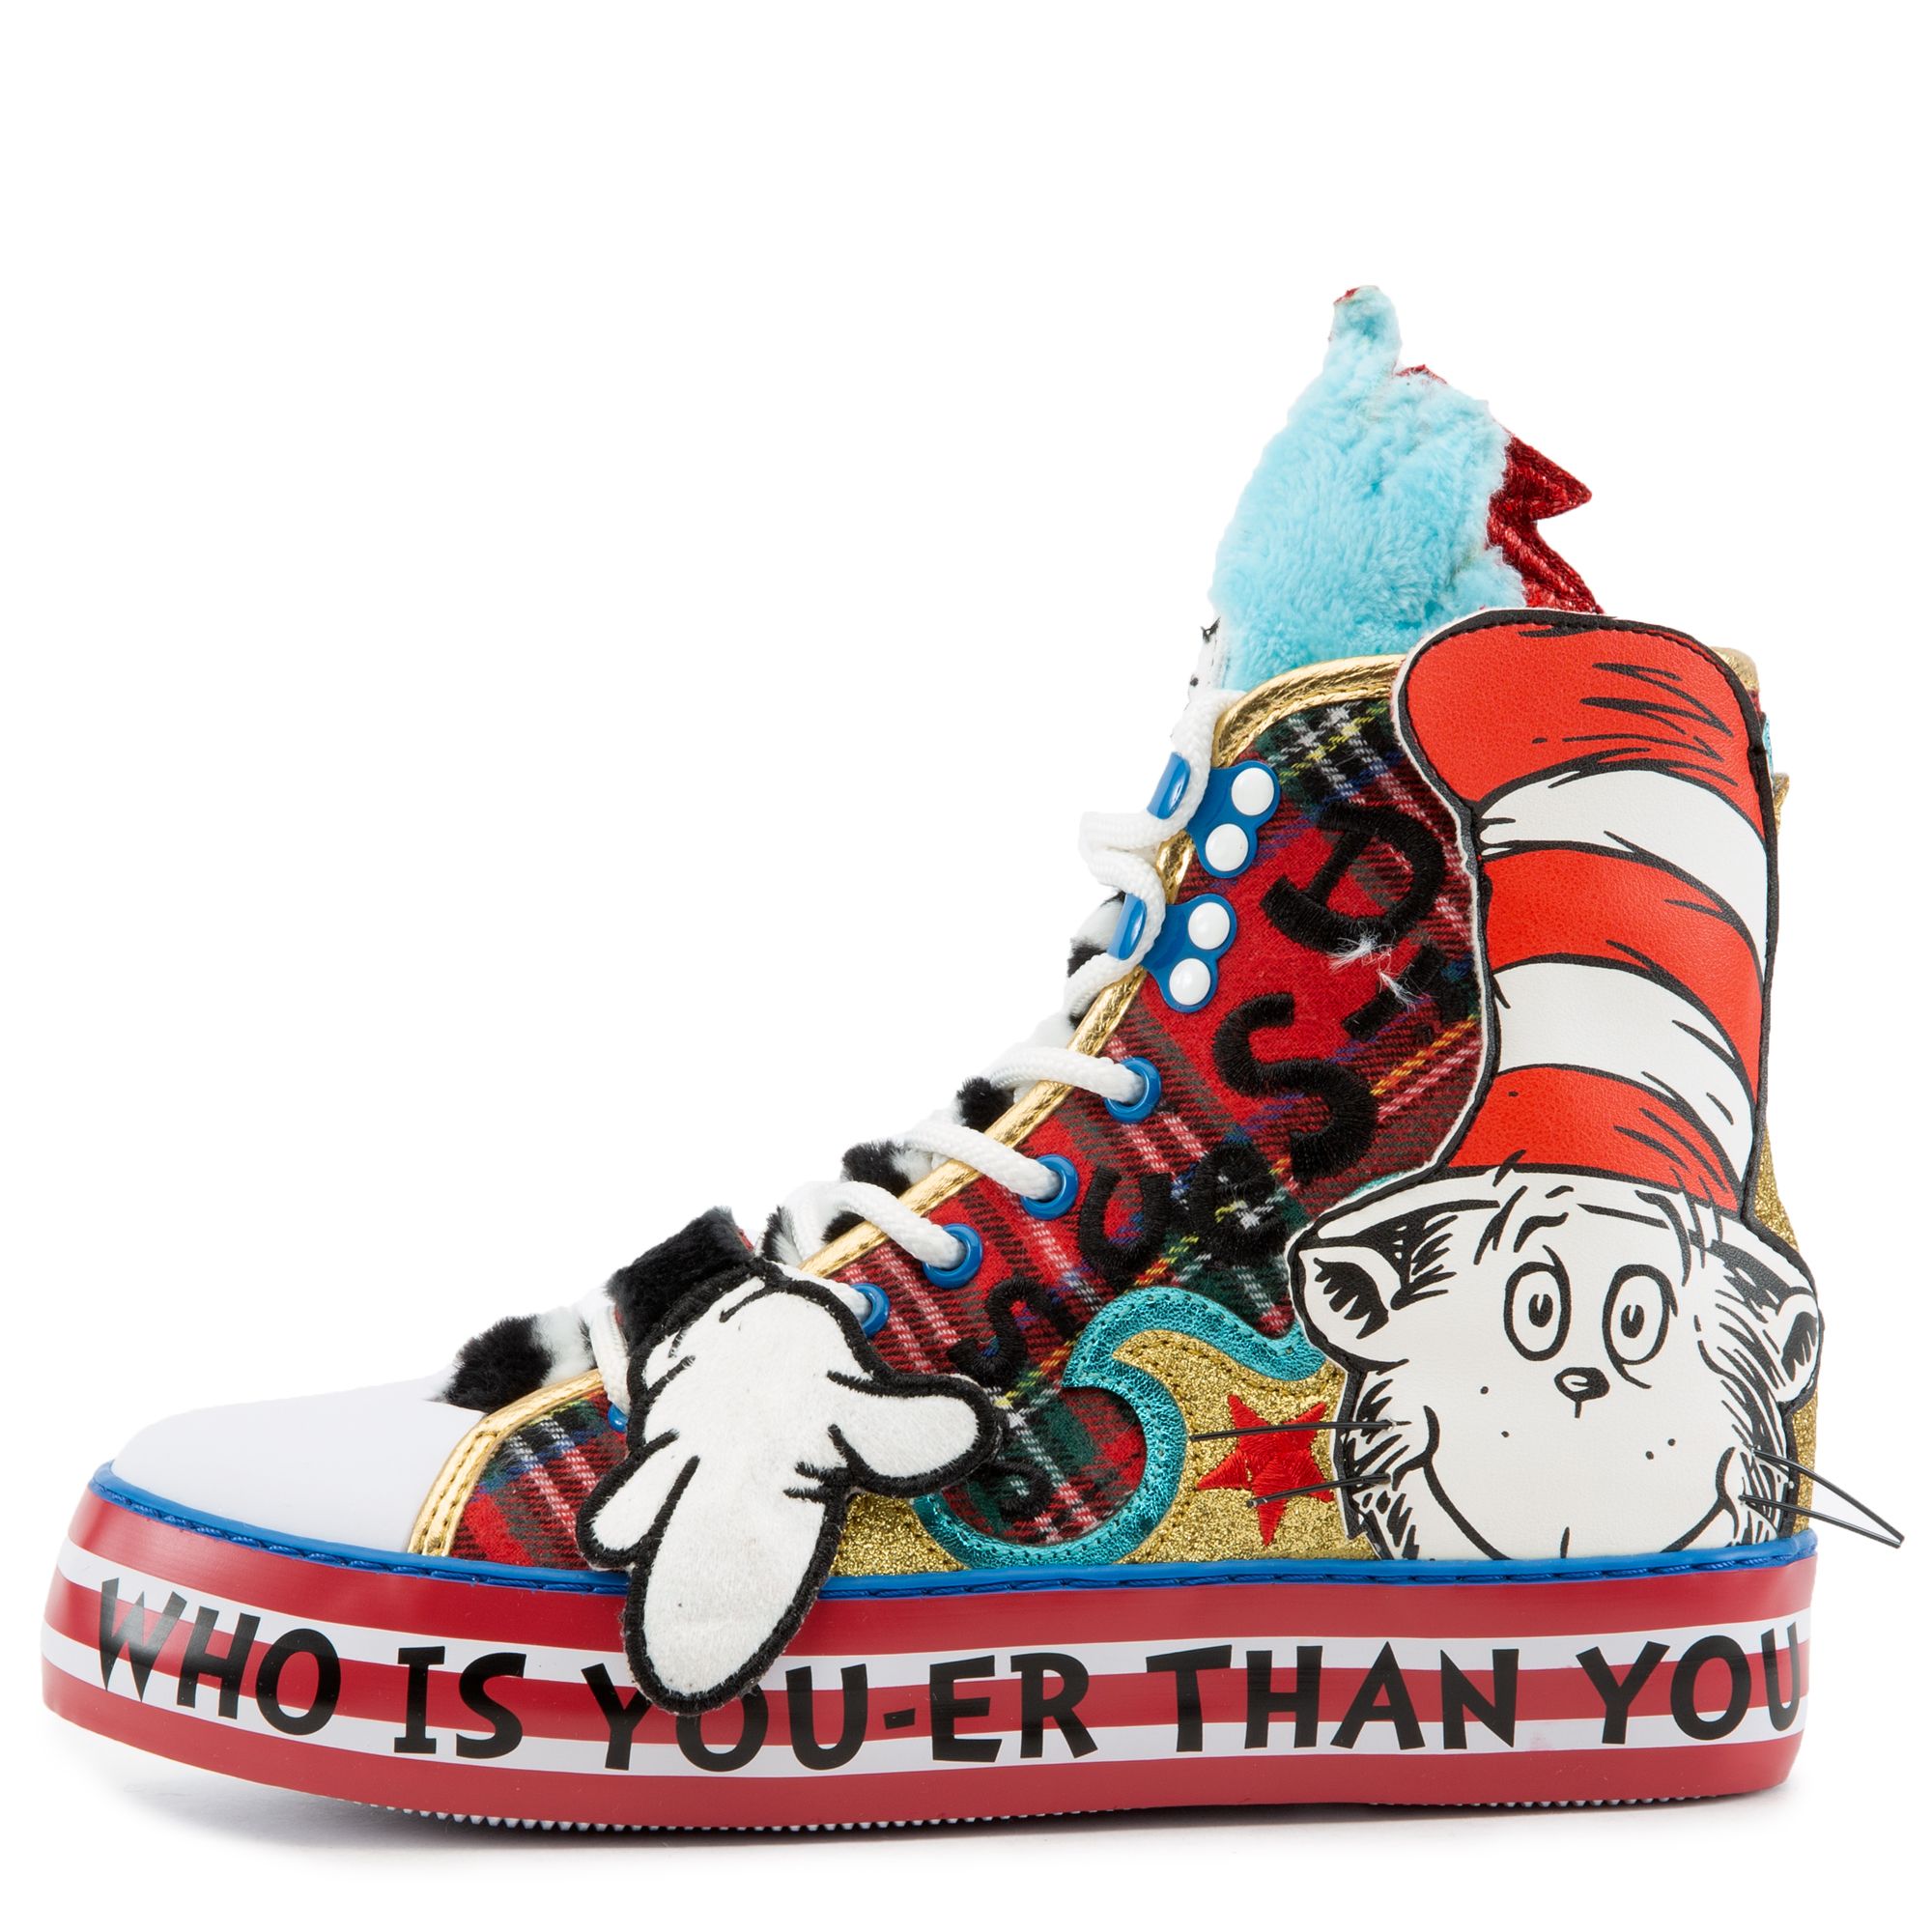 You-er Than You Dr Seuss Irregular Choice Cat In The Hat Boots Shoes 